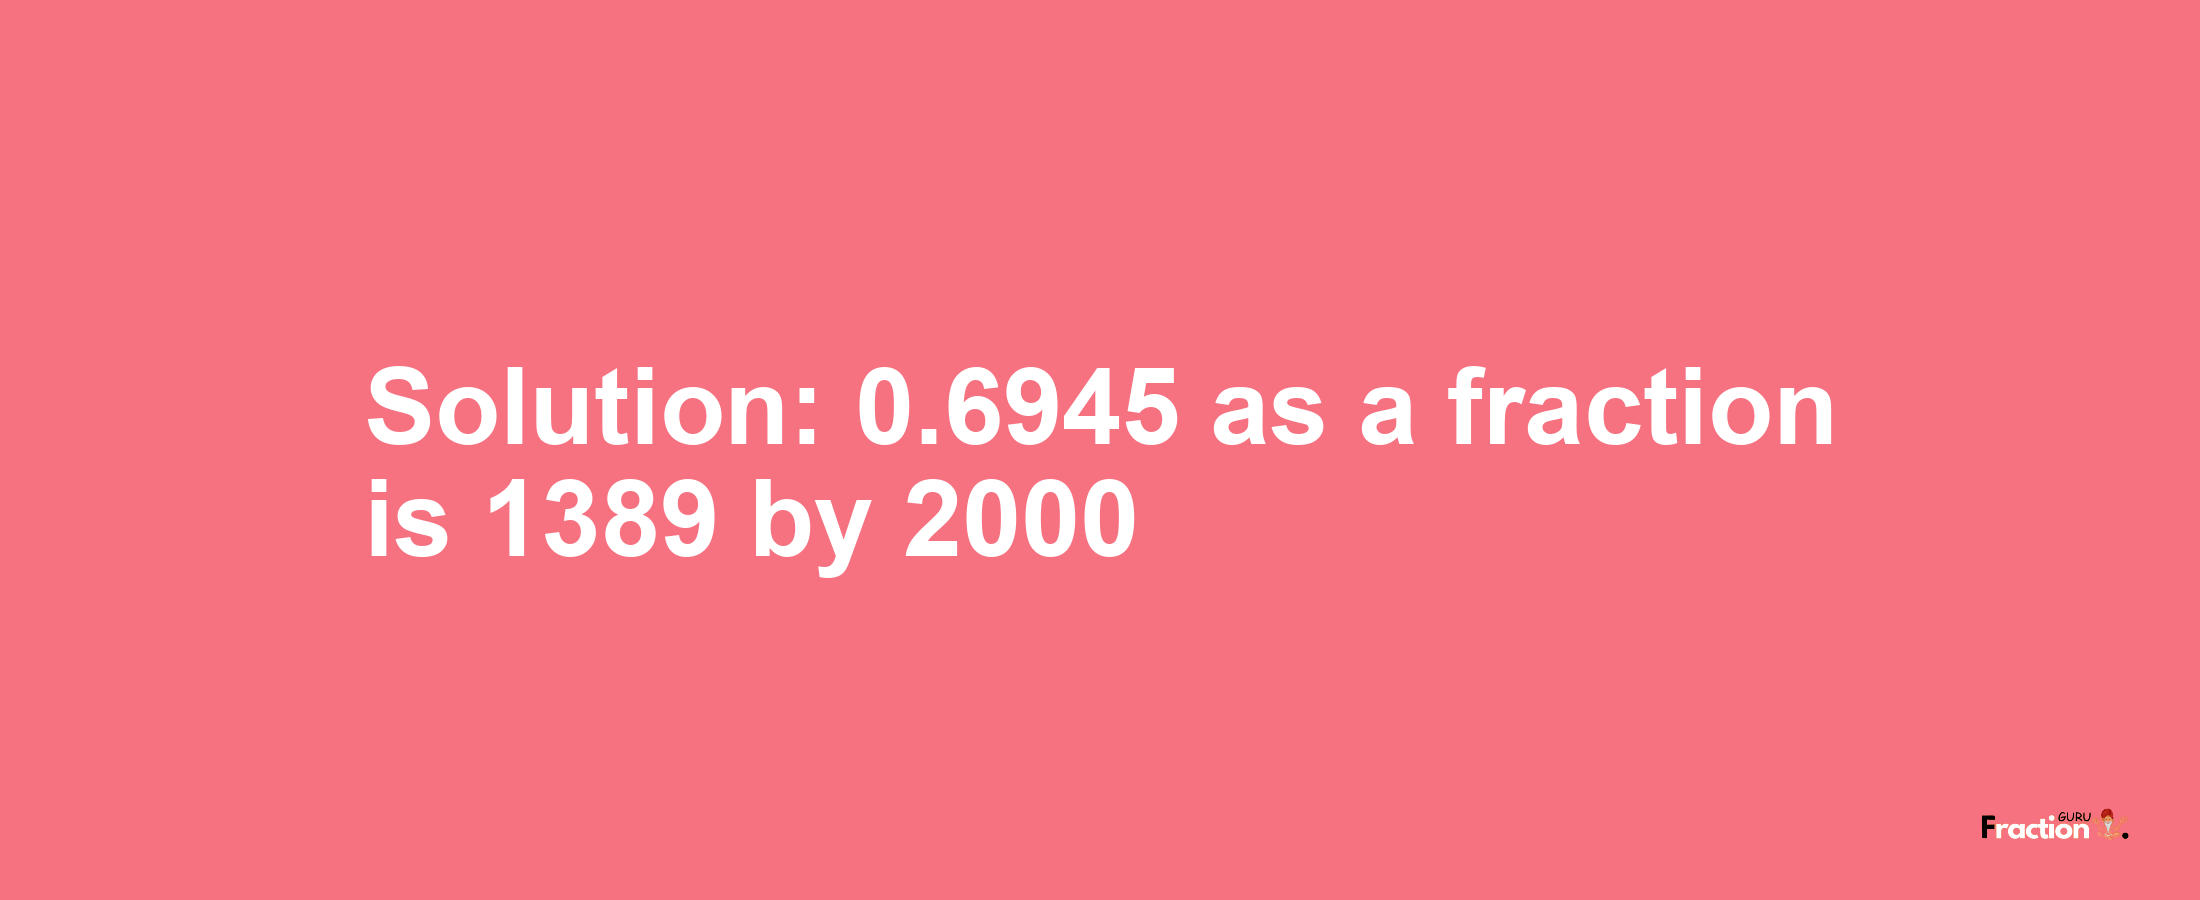 Solution:0.6945 as a fraction is 1389/2000